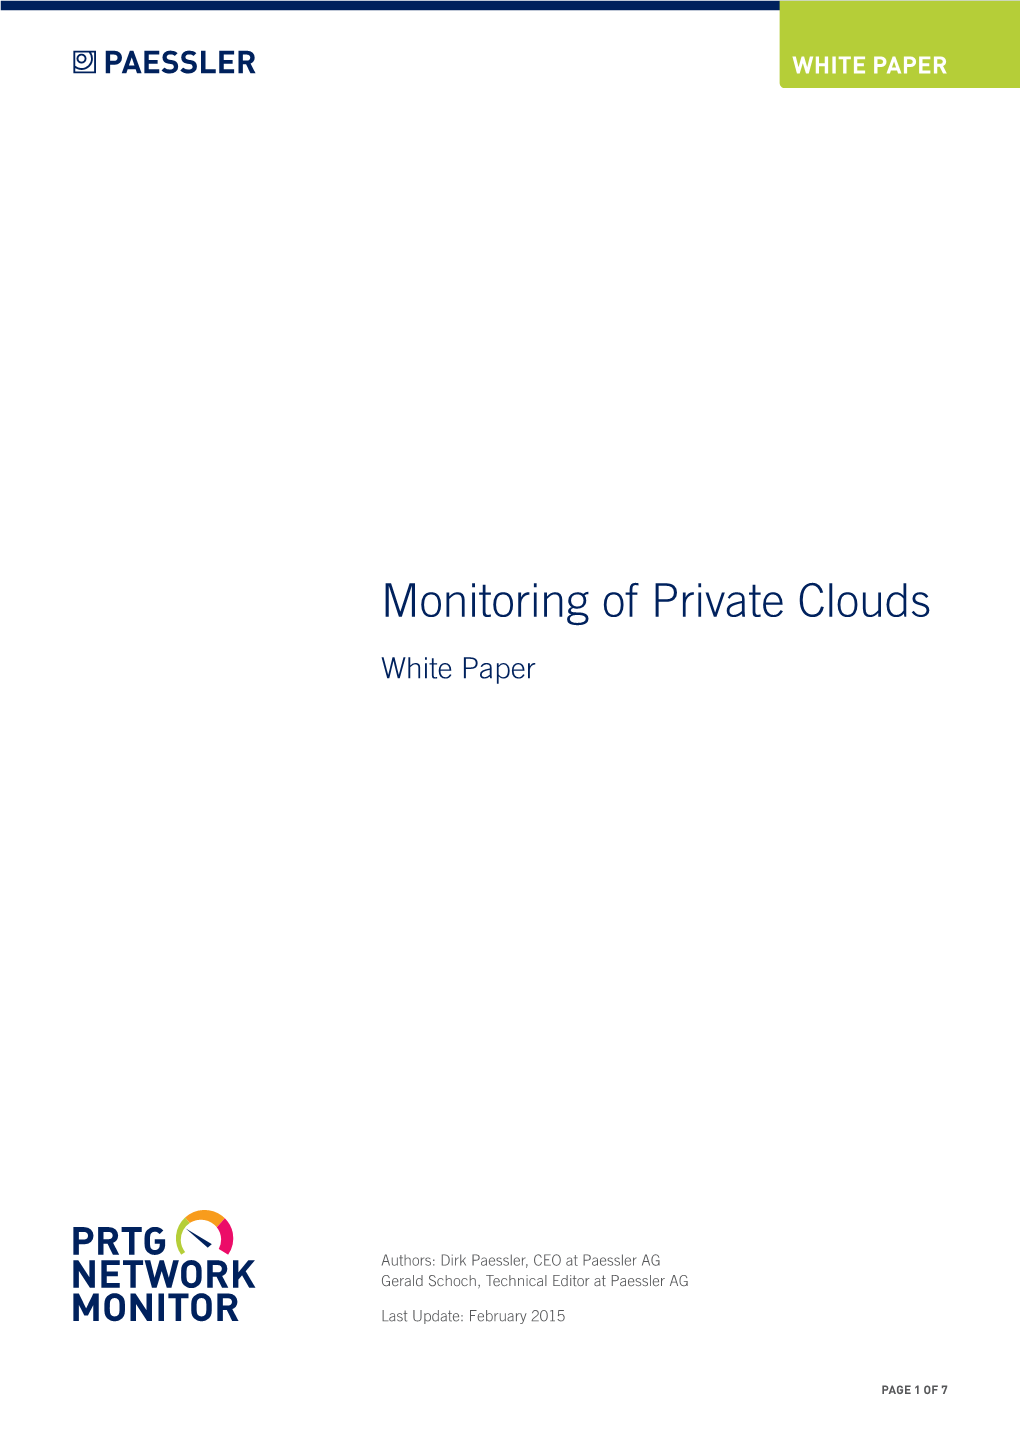 Monitoring of Private Clouds White Paper